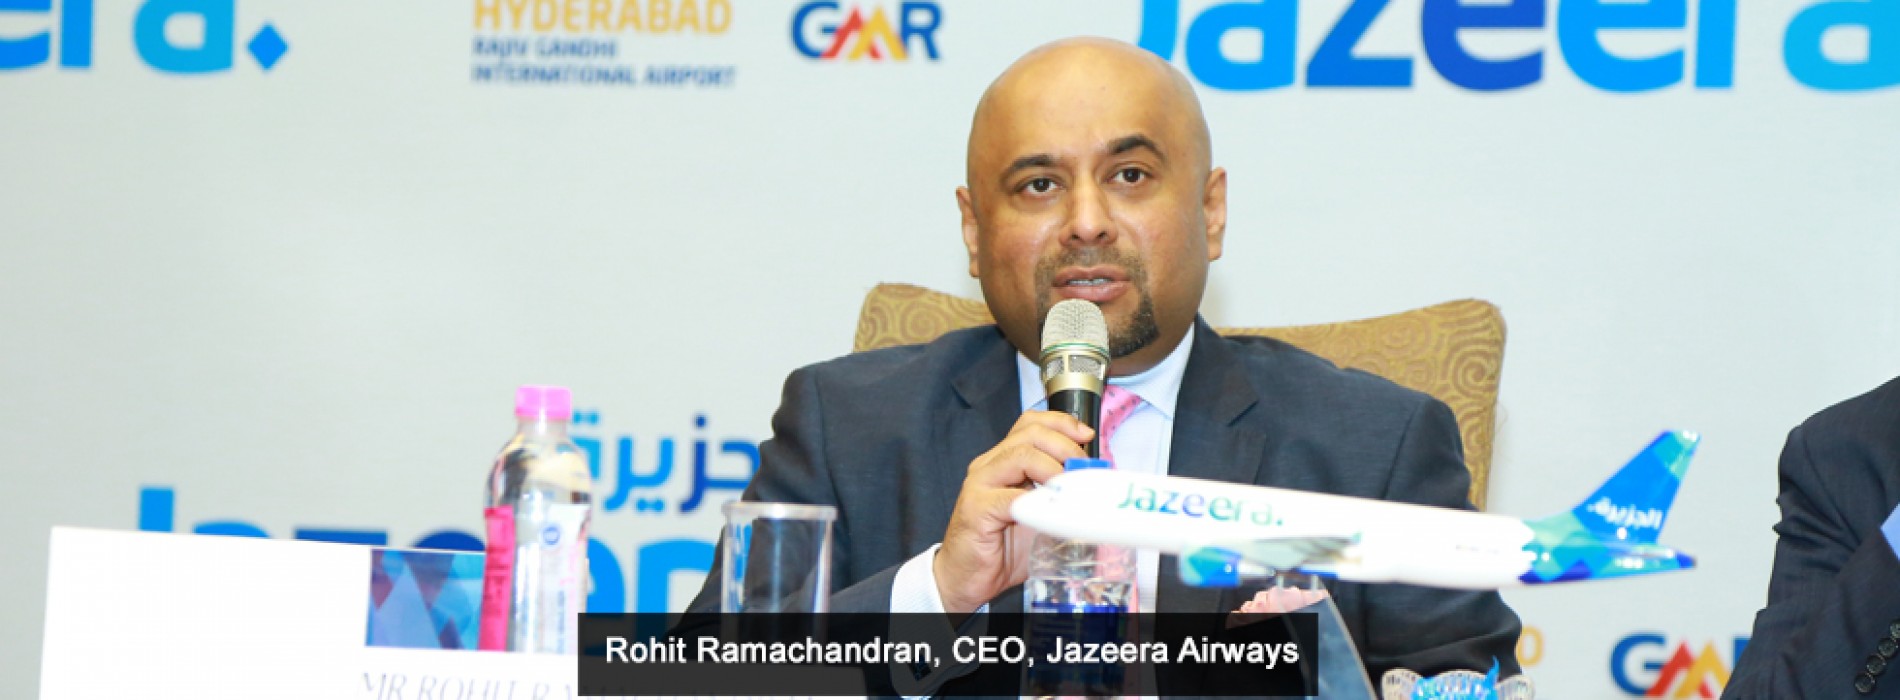 Kuwait’s Jazeera Airways connects to India with Daily flights to Hyderabad